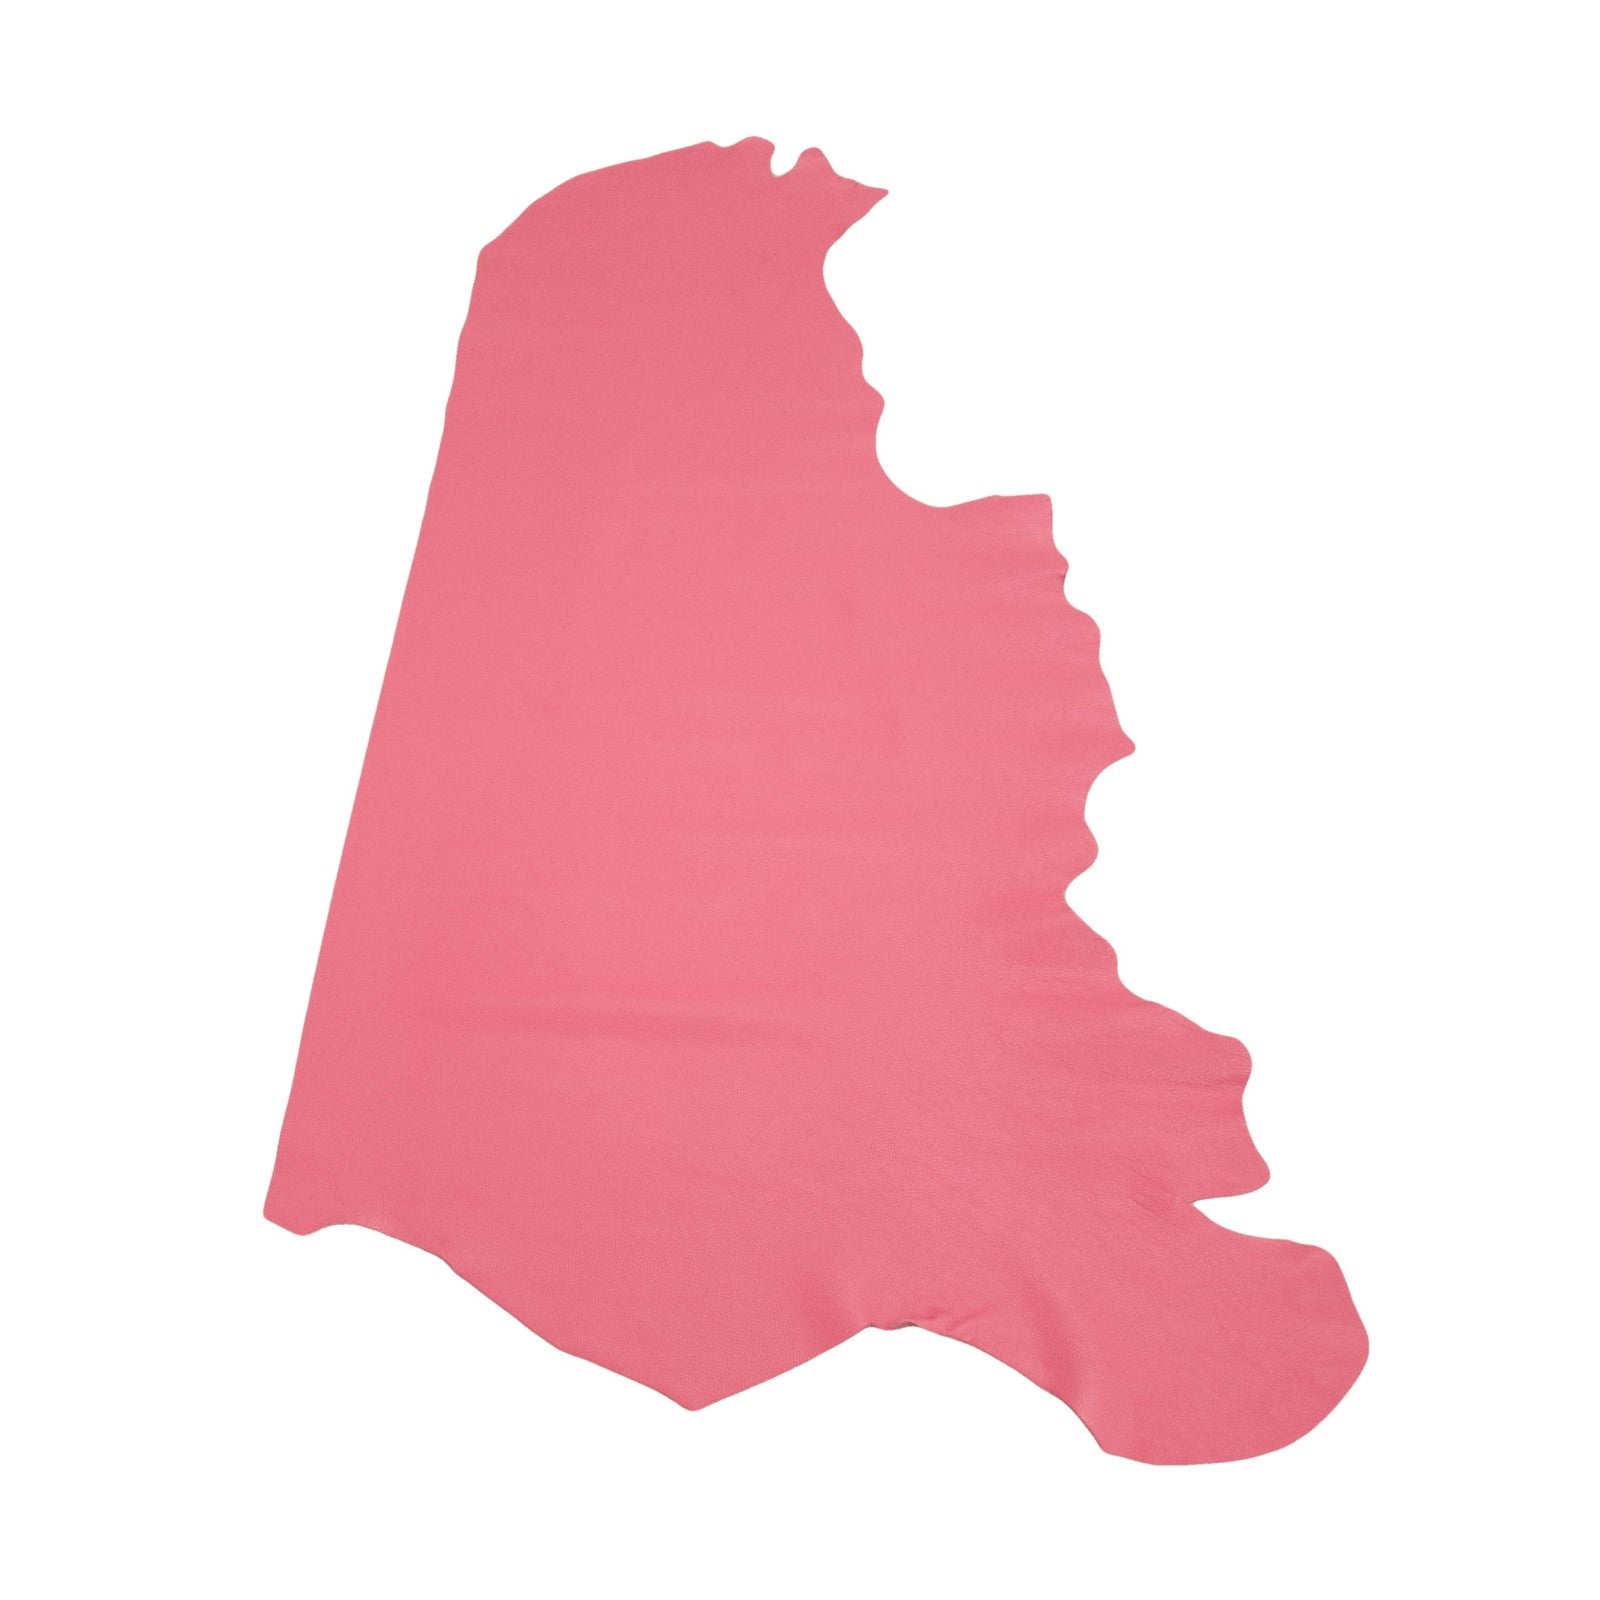 Hollywood Hot Pink Tried n True 3-4 oz Leather Cow Hides, 24-26 Square Foot / Side | The Leather Guy